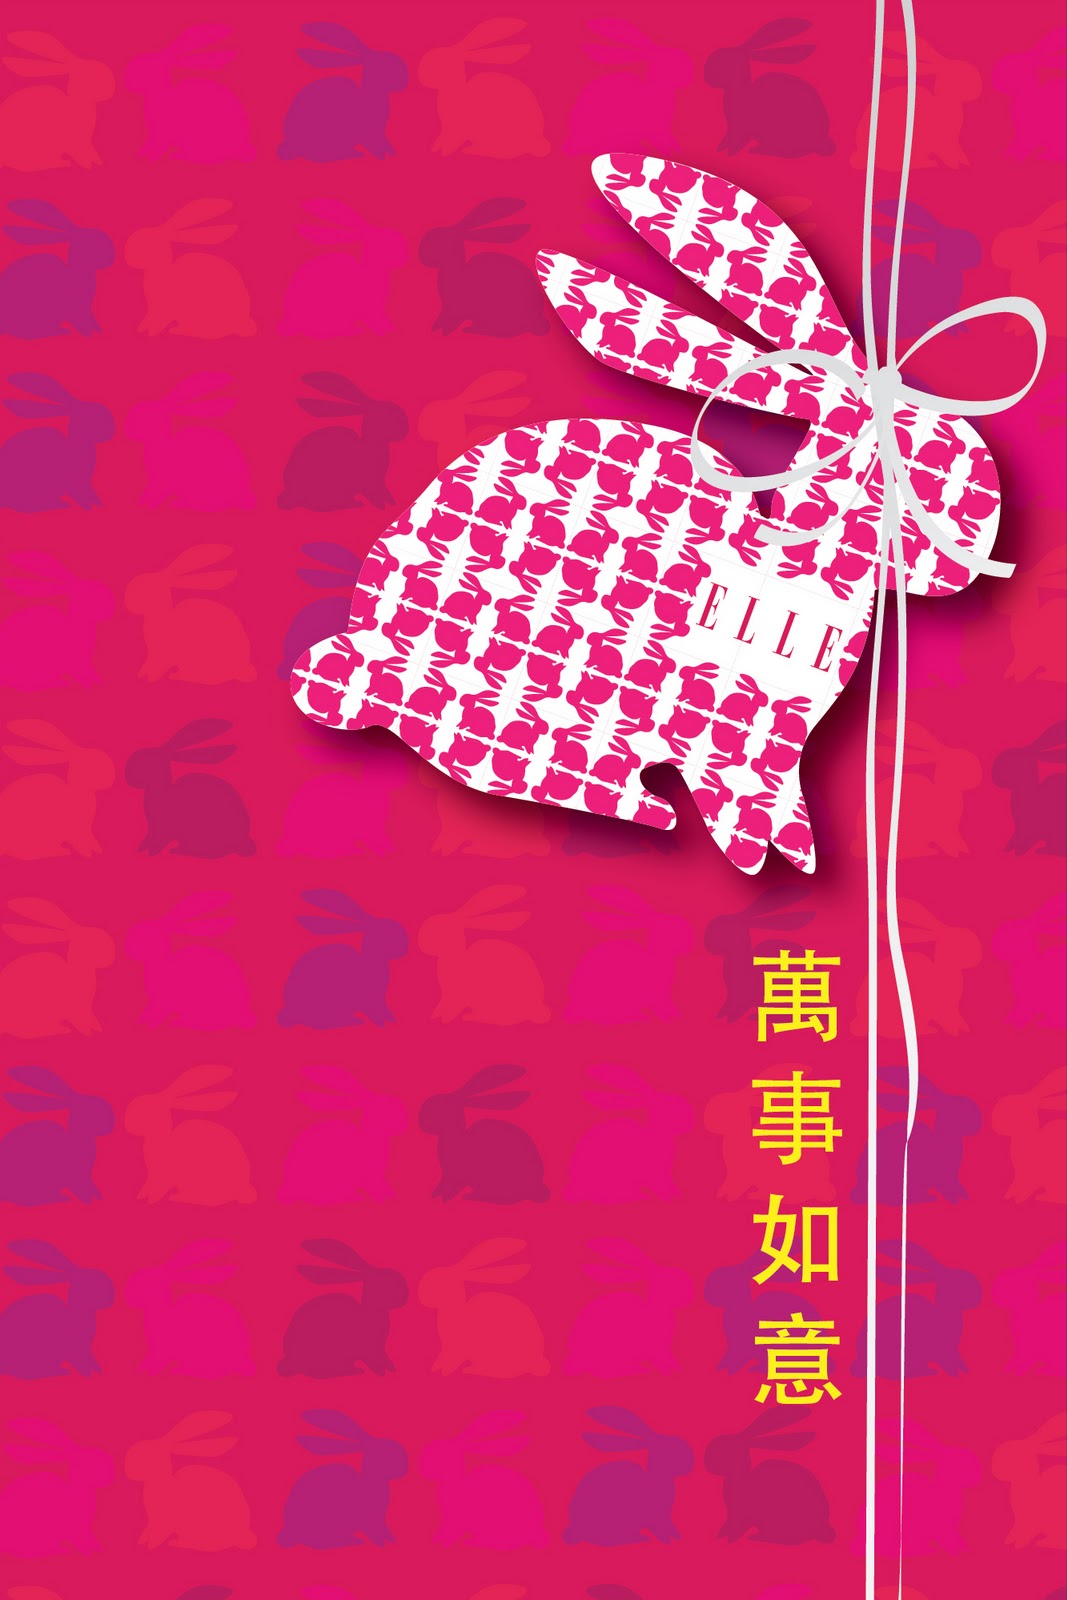 iphone etc 2011 wallpaper collection chinese new year wallpaper 2011